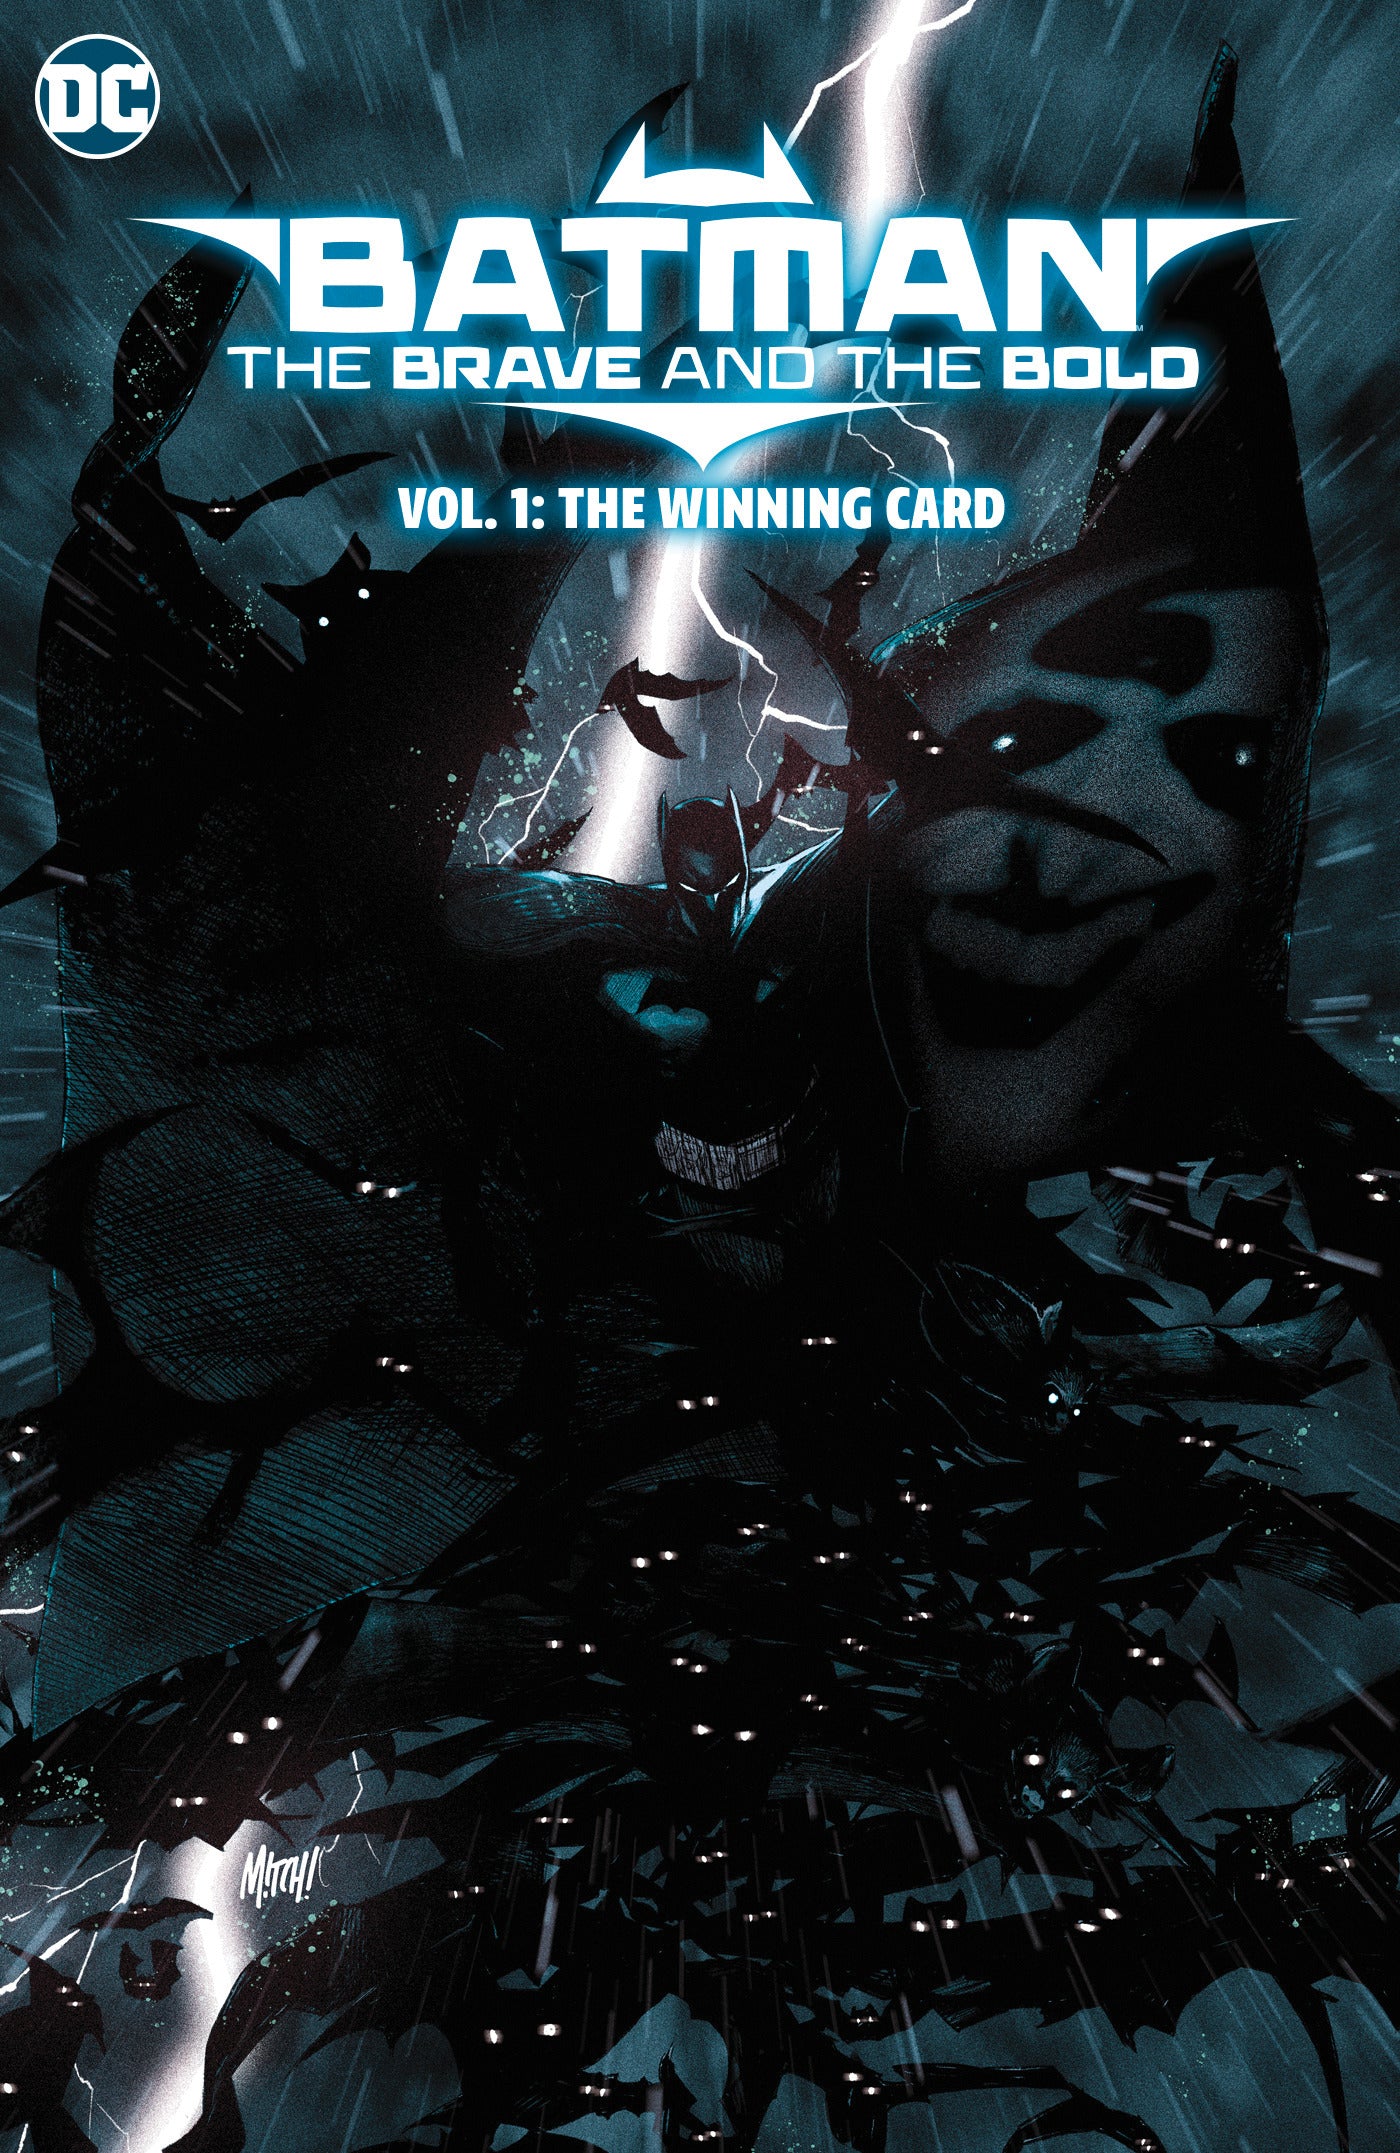 Batman: The Brave and the Bold Vol. 1: The Winning Card